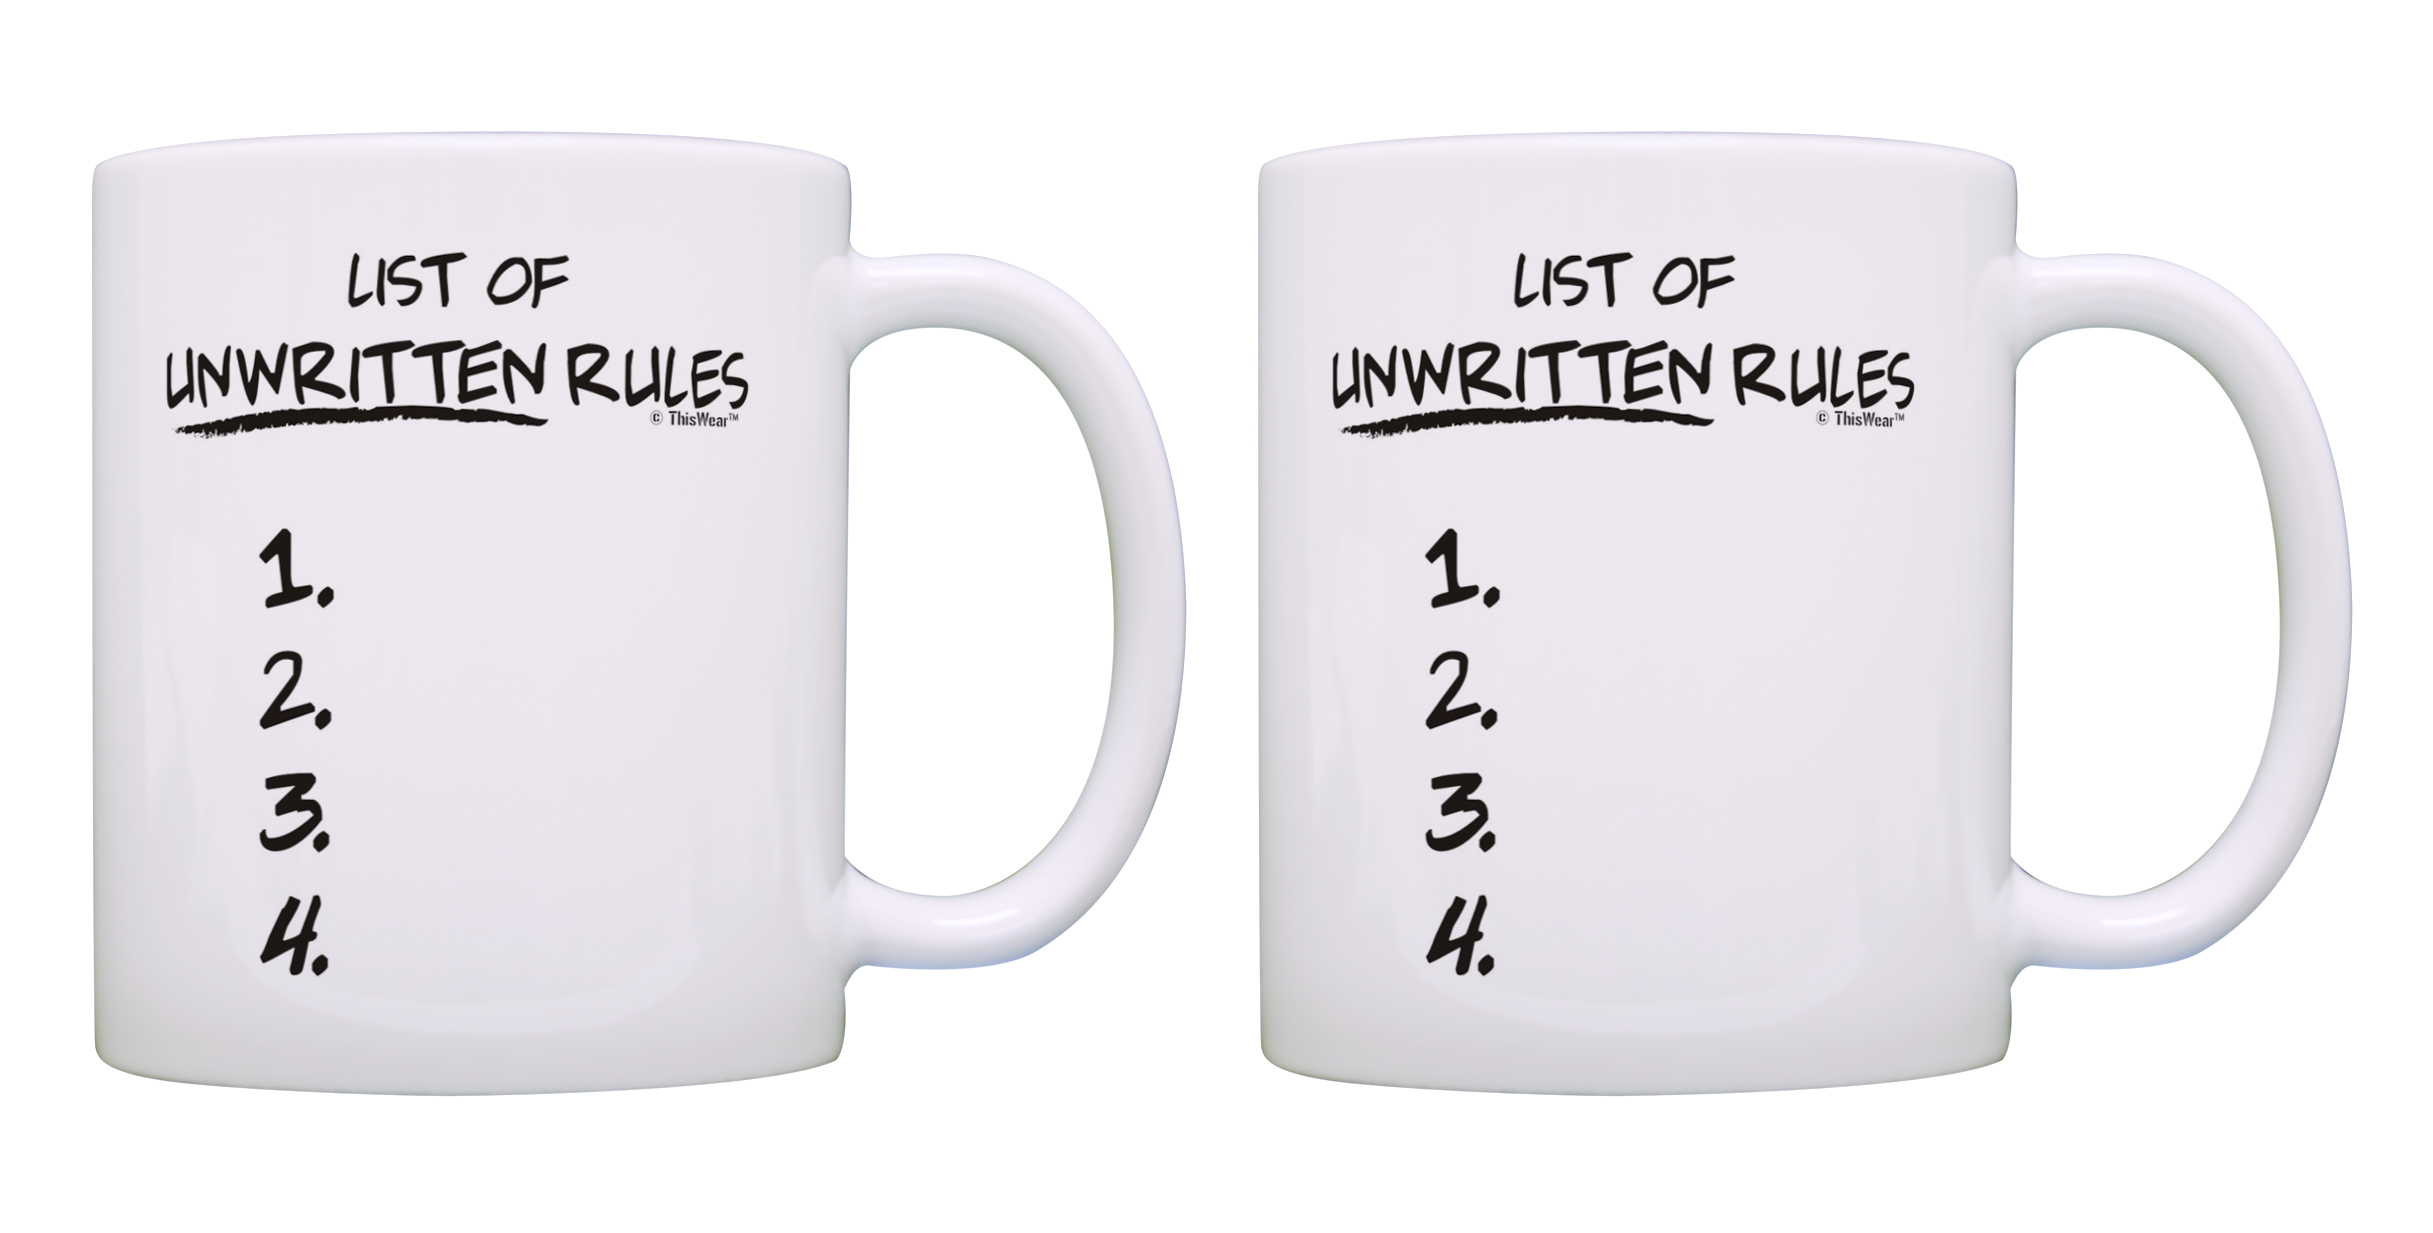 ThisWear Funny Quote Mugs List Of Unwritten Rules Funny Coffee Mug Set Humorous Mugs Sarcasm Mugs Office Coffee Mug Set 11 ounce 2 Pack Coffee Mugs - image 1 of 4